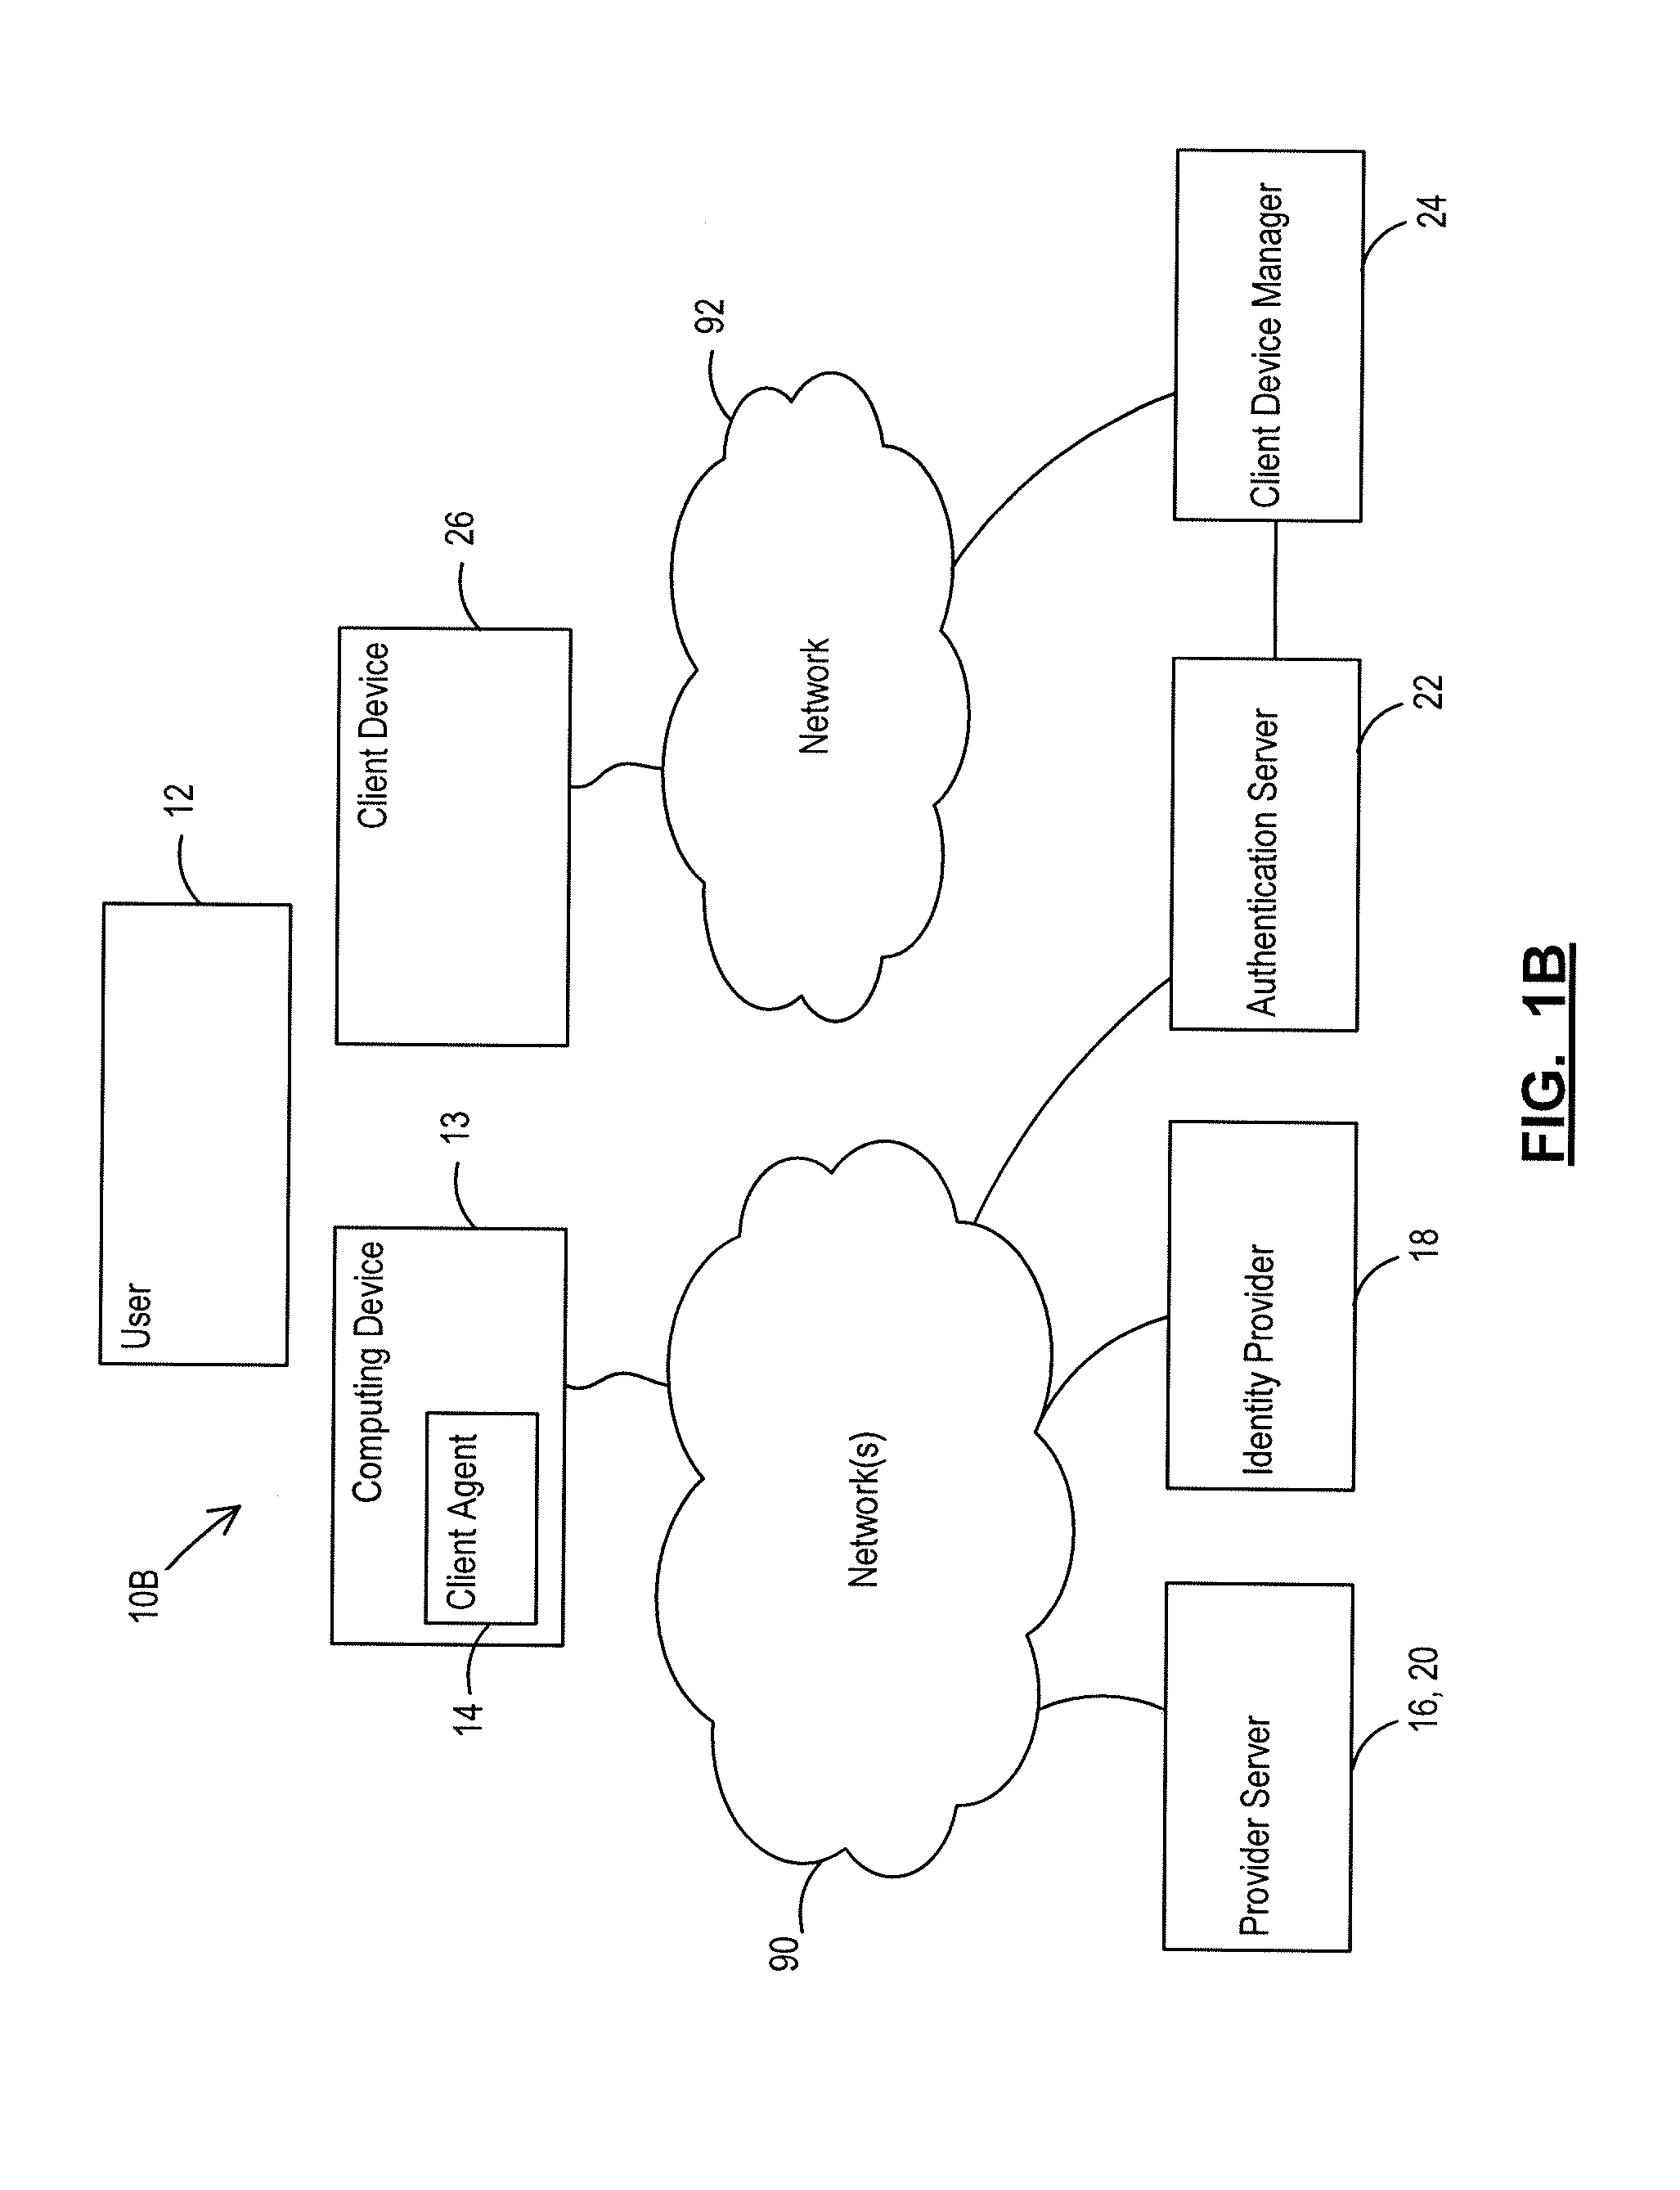 Methods and systems for using derived credentials to authenticate a device across multiple platforms